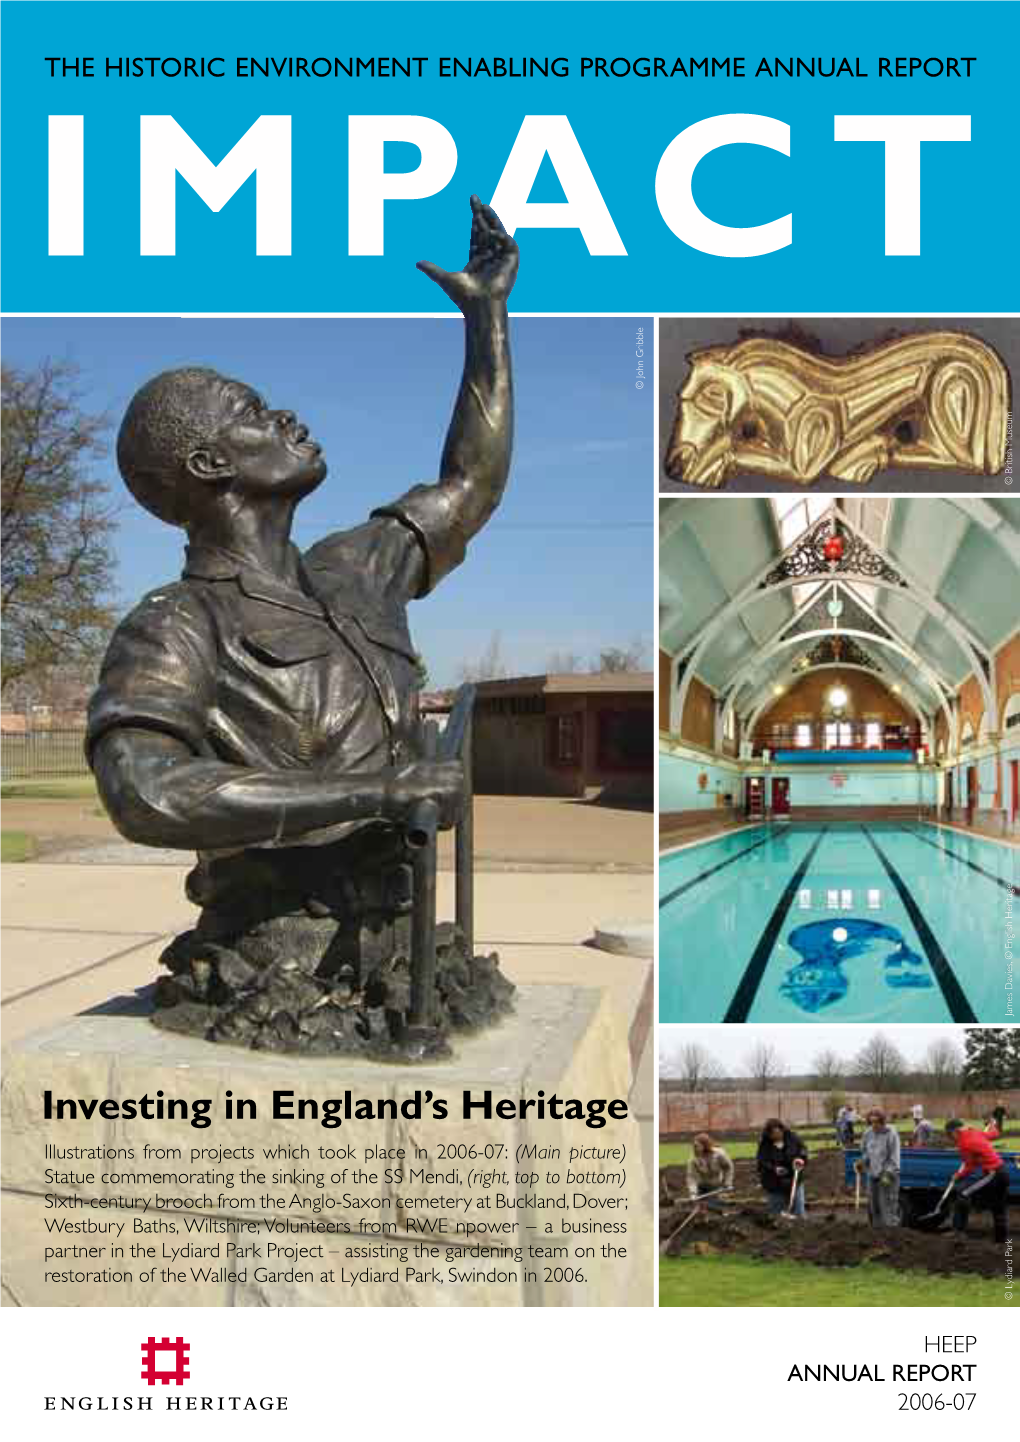 Investing in England's Heritage